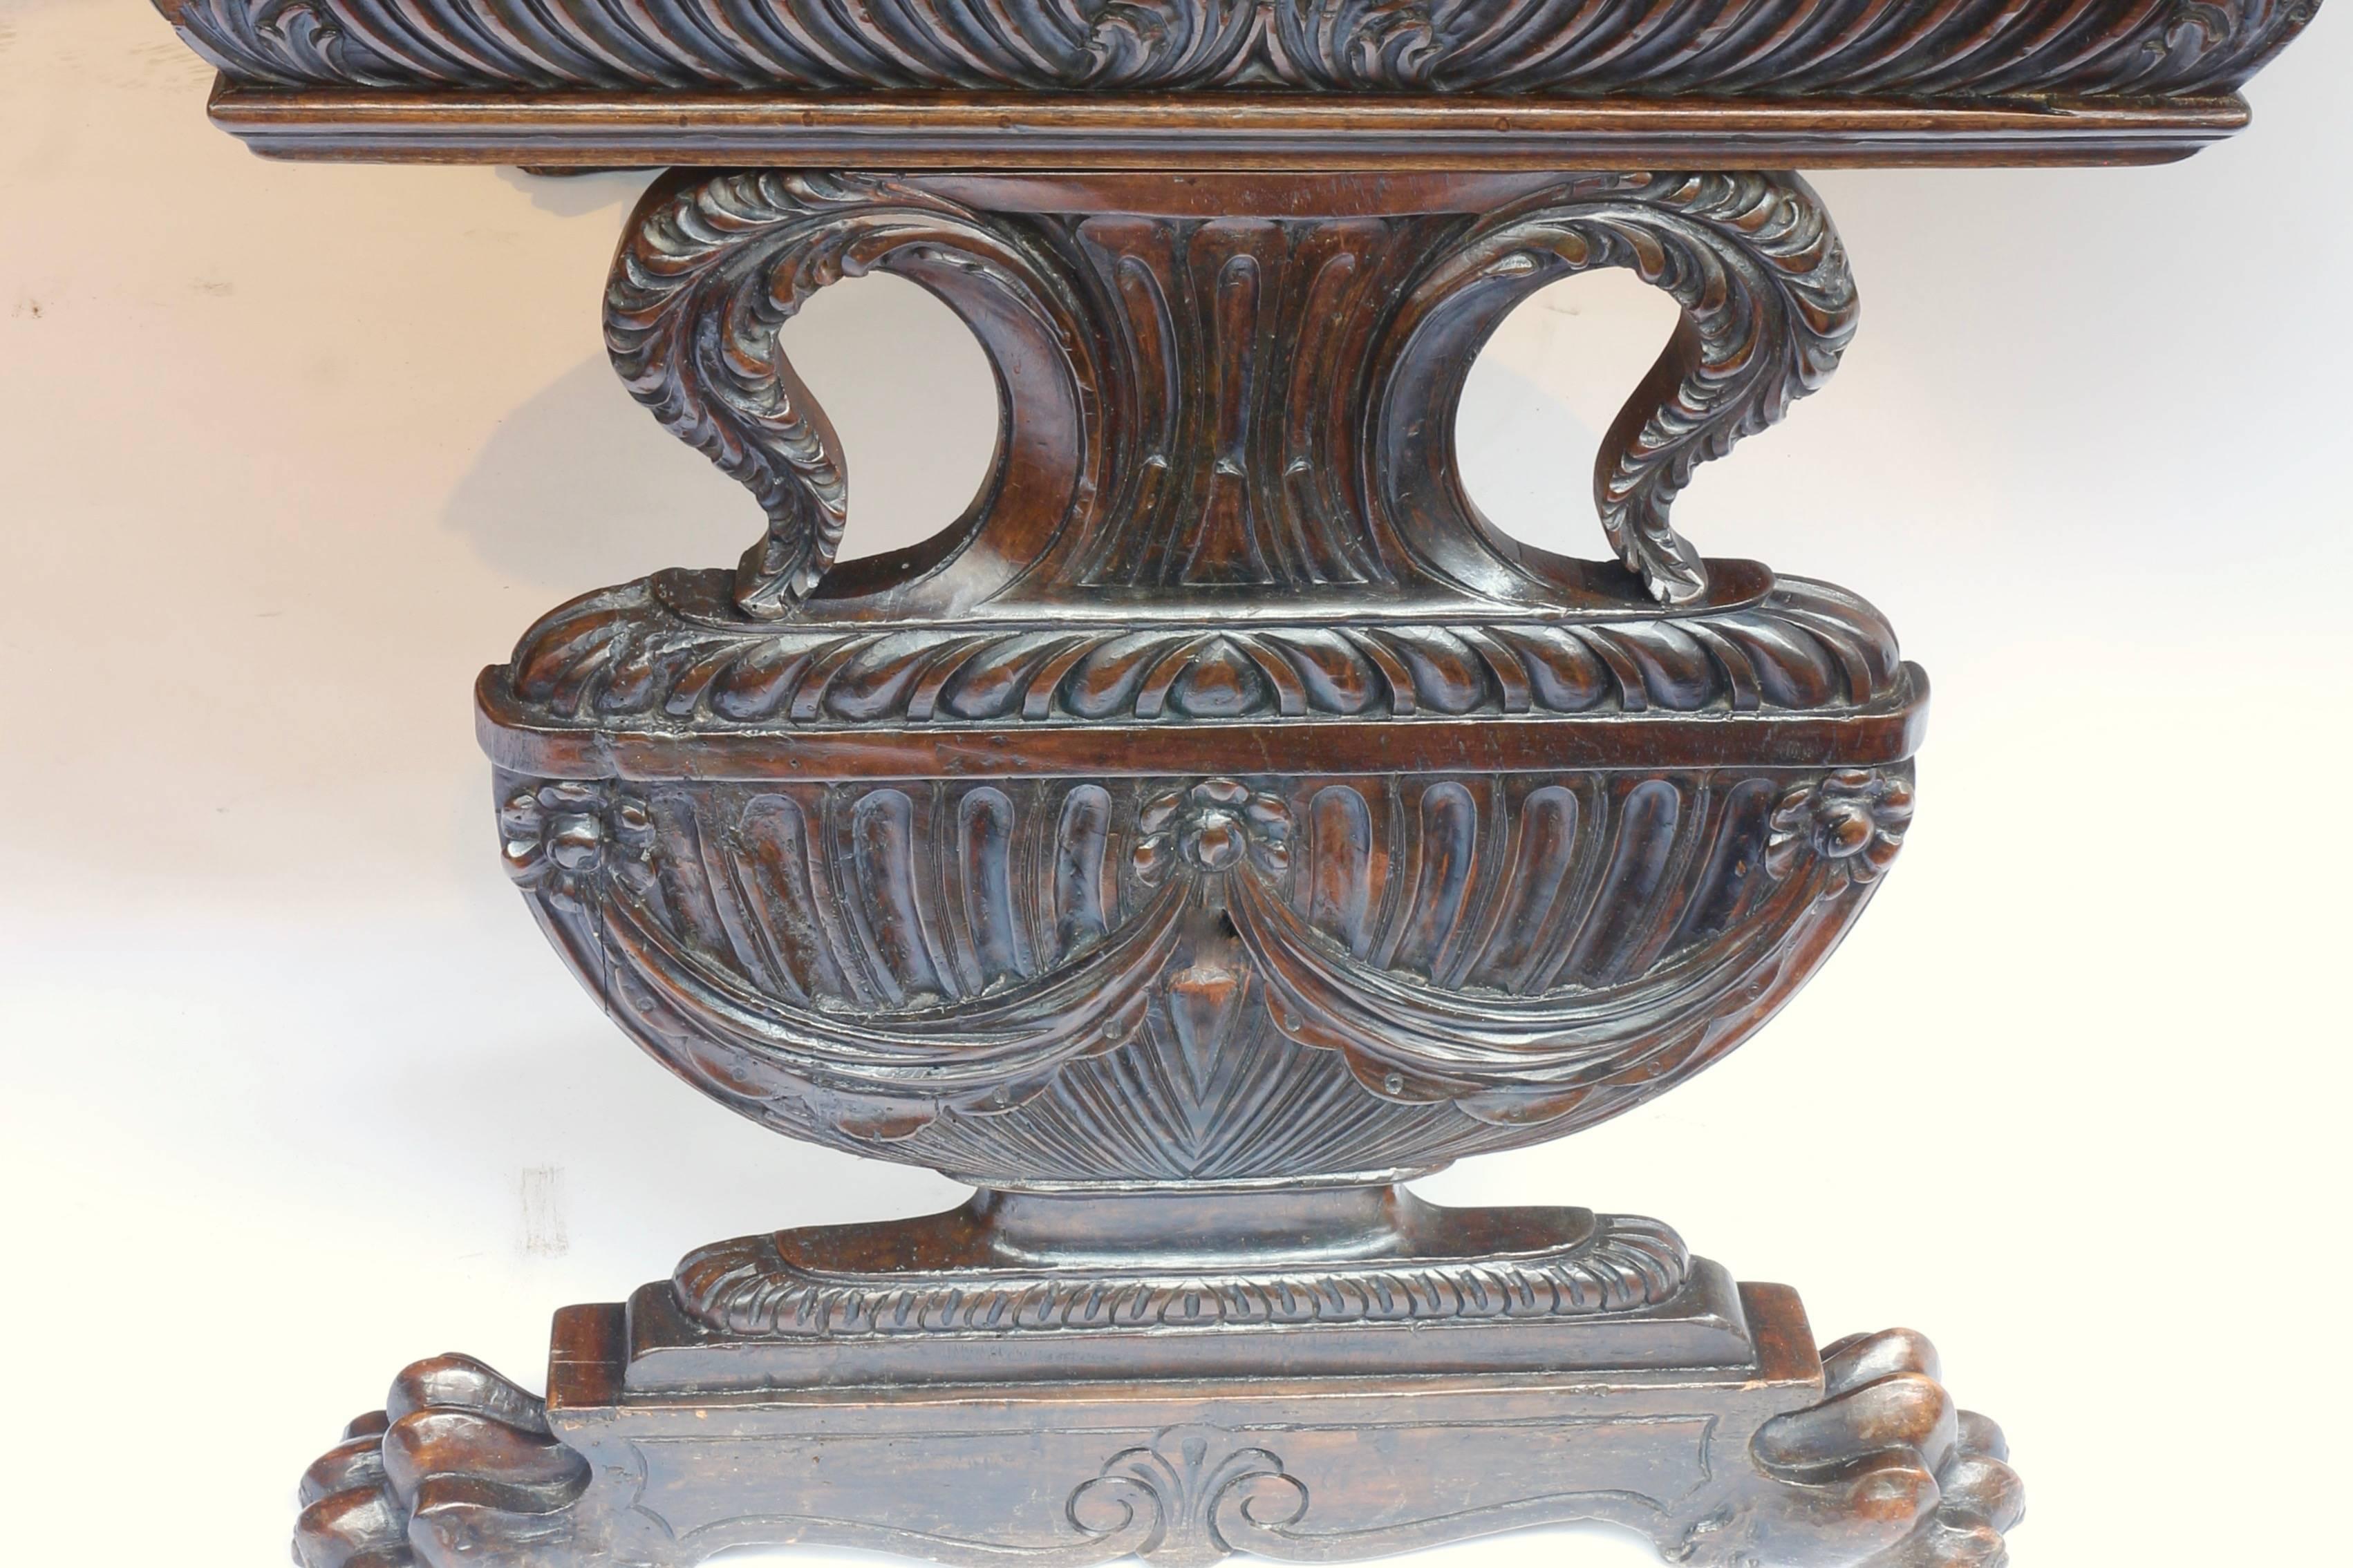 A late Renaissance walnut table with legs in the form of Tuscany vases,
Italy, Florence, tuscany, early 18th century.
The inside of the drawer was made in the late 19th century.